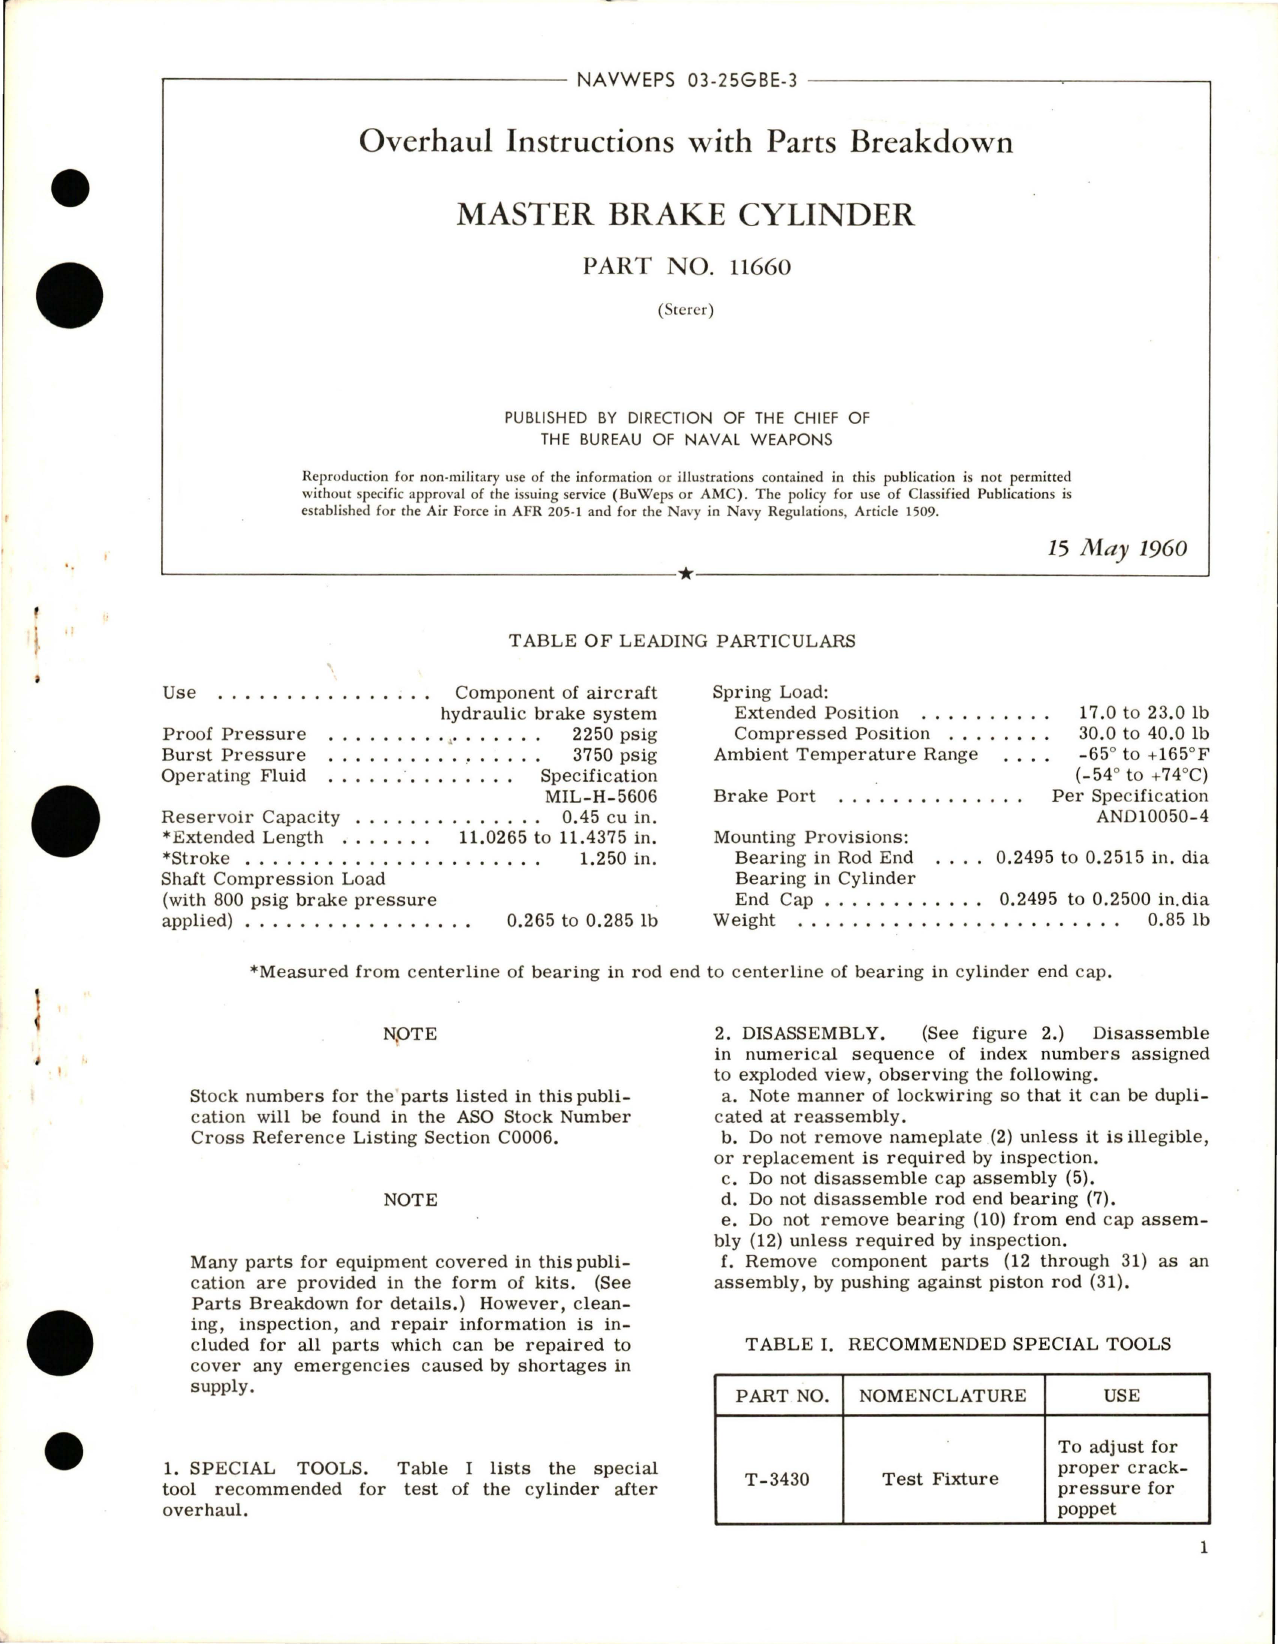 Sample page 1 from AirCorps Library document: Overhaul Instructions with Parts Breakdown for Master Brake Cylinder - Part 11660